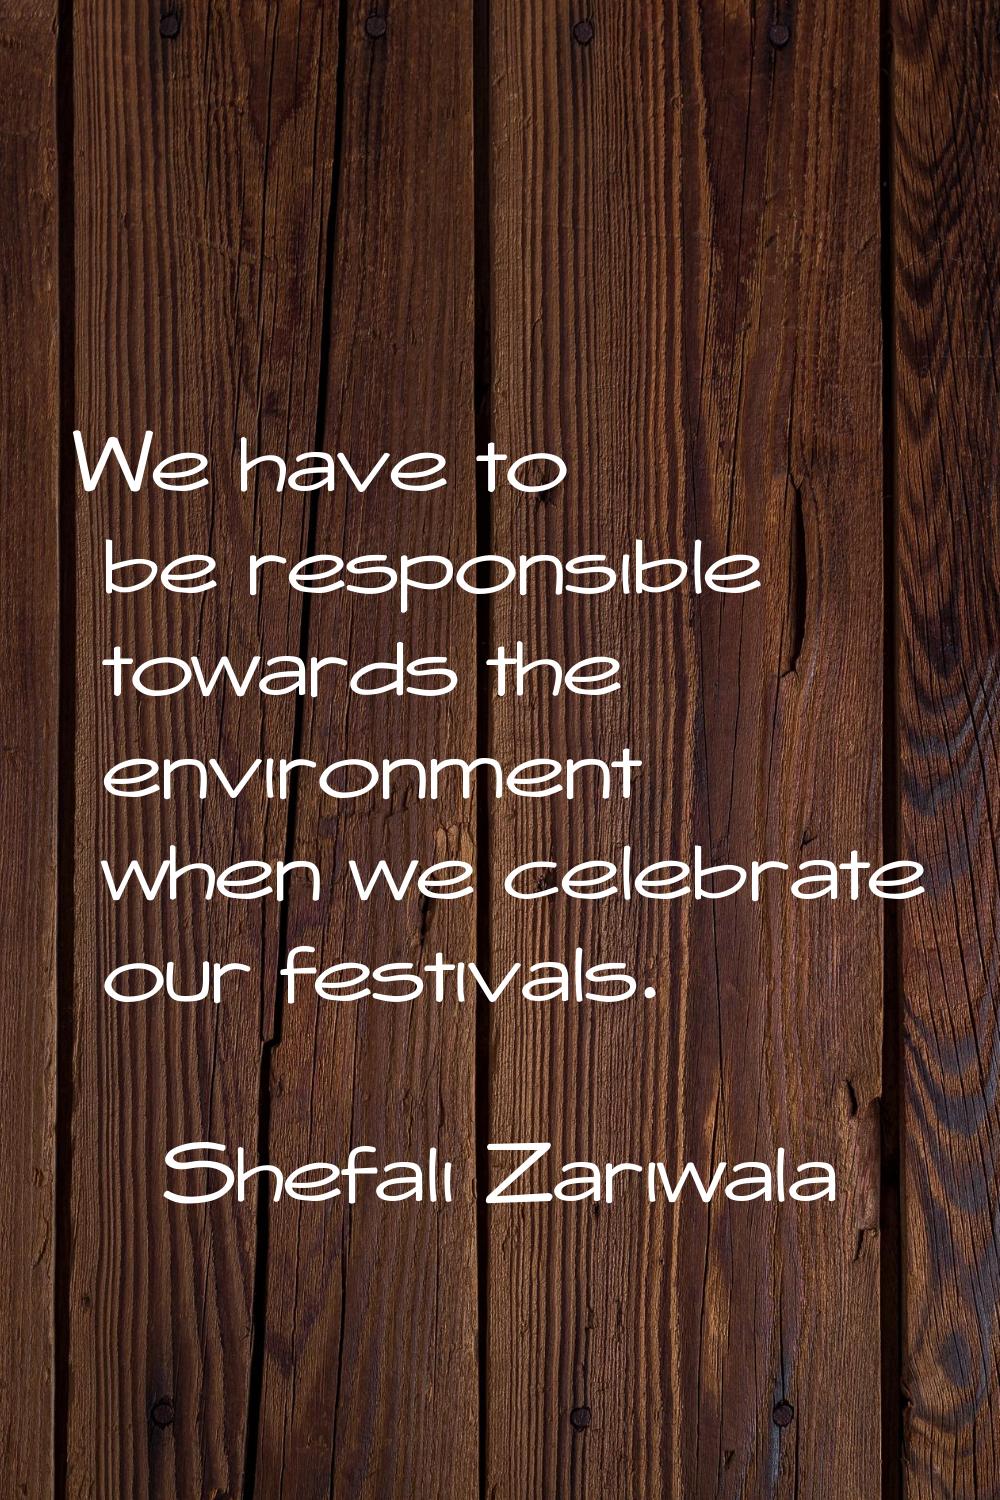 We have to be responsible towards the environment when we celebrate our festivals.